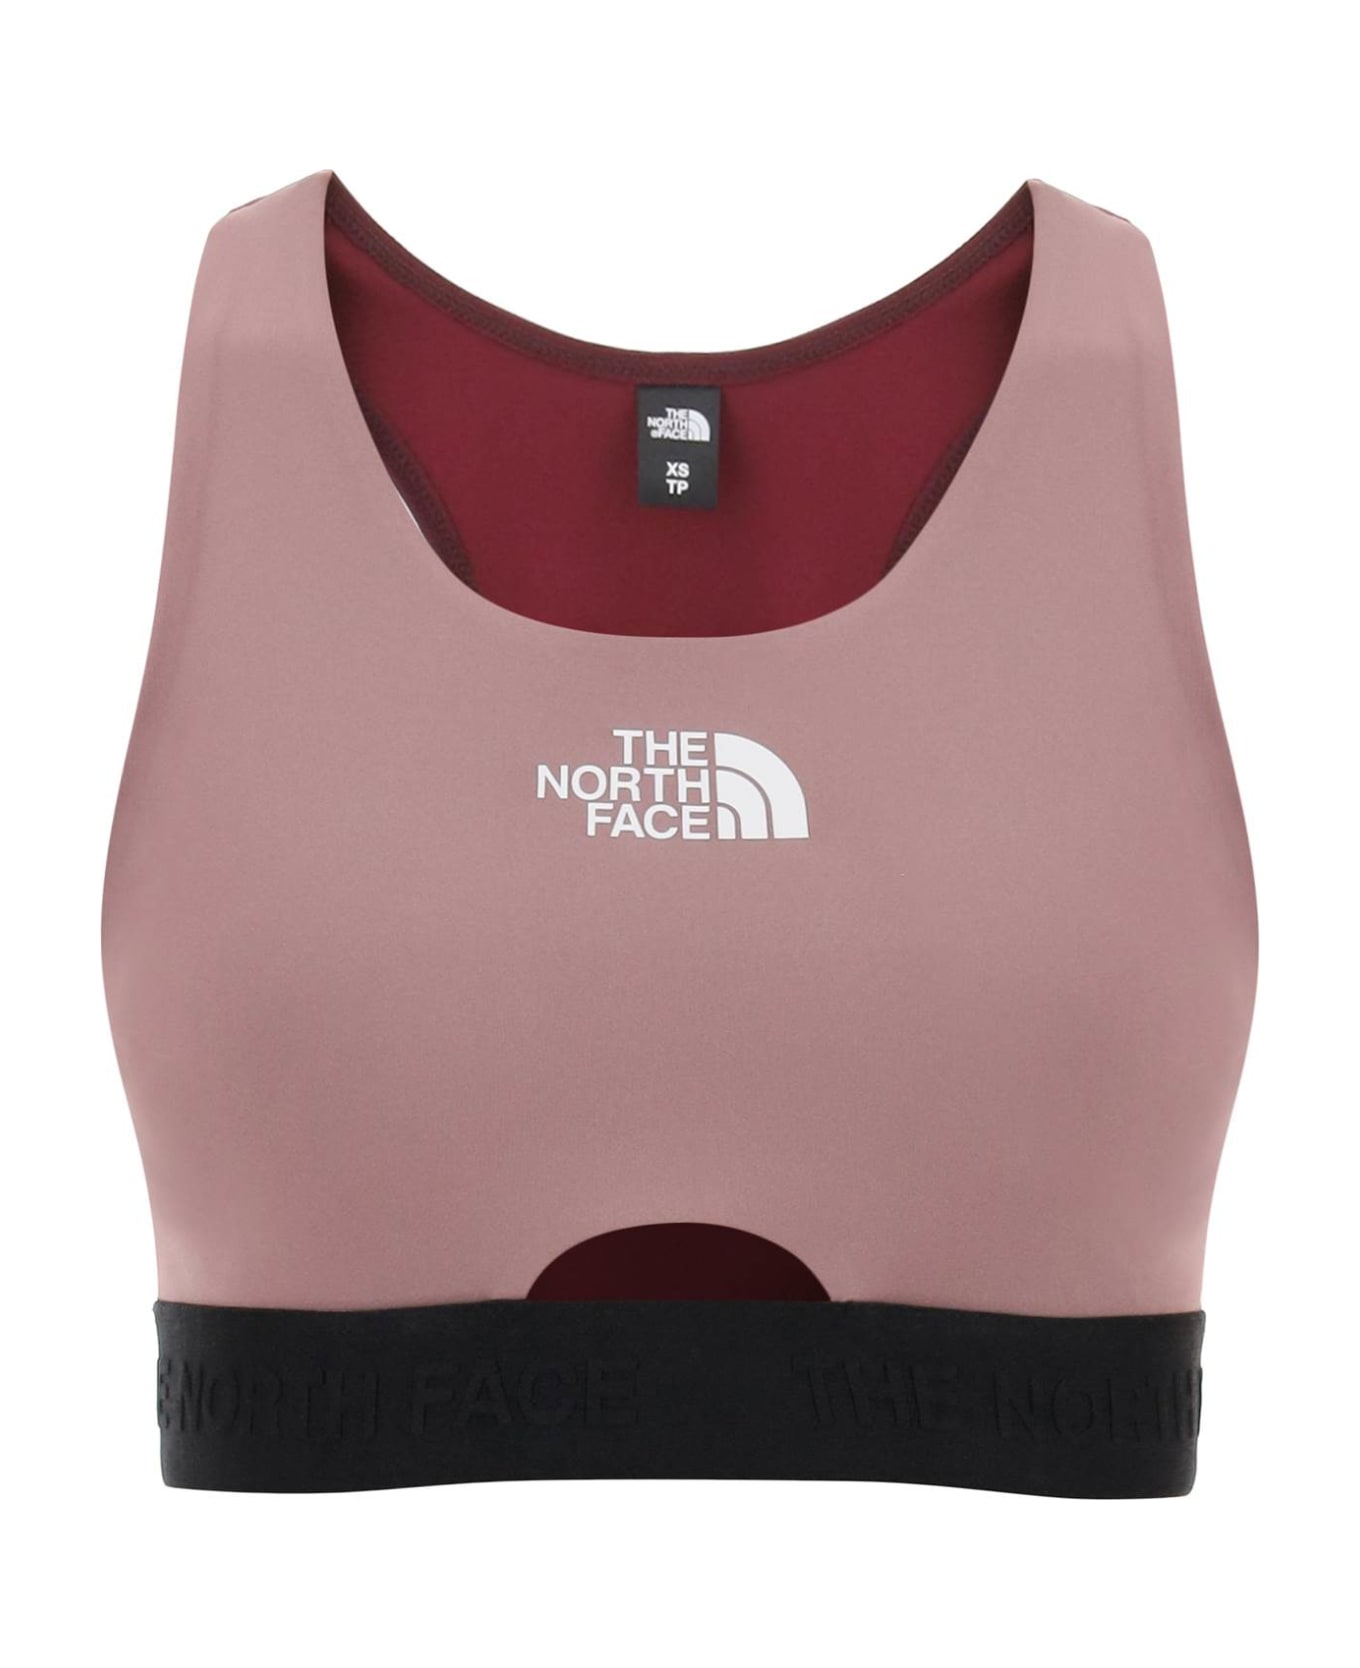 The North Face Mountain Athletics Sports Top - FAWN GREY BOYSENBERRY (Purple)